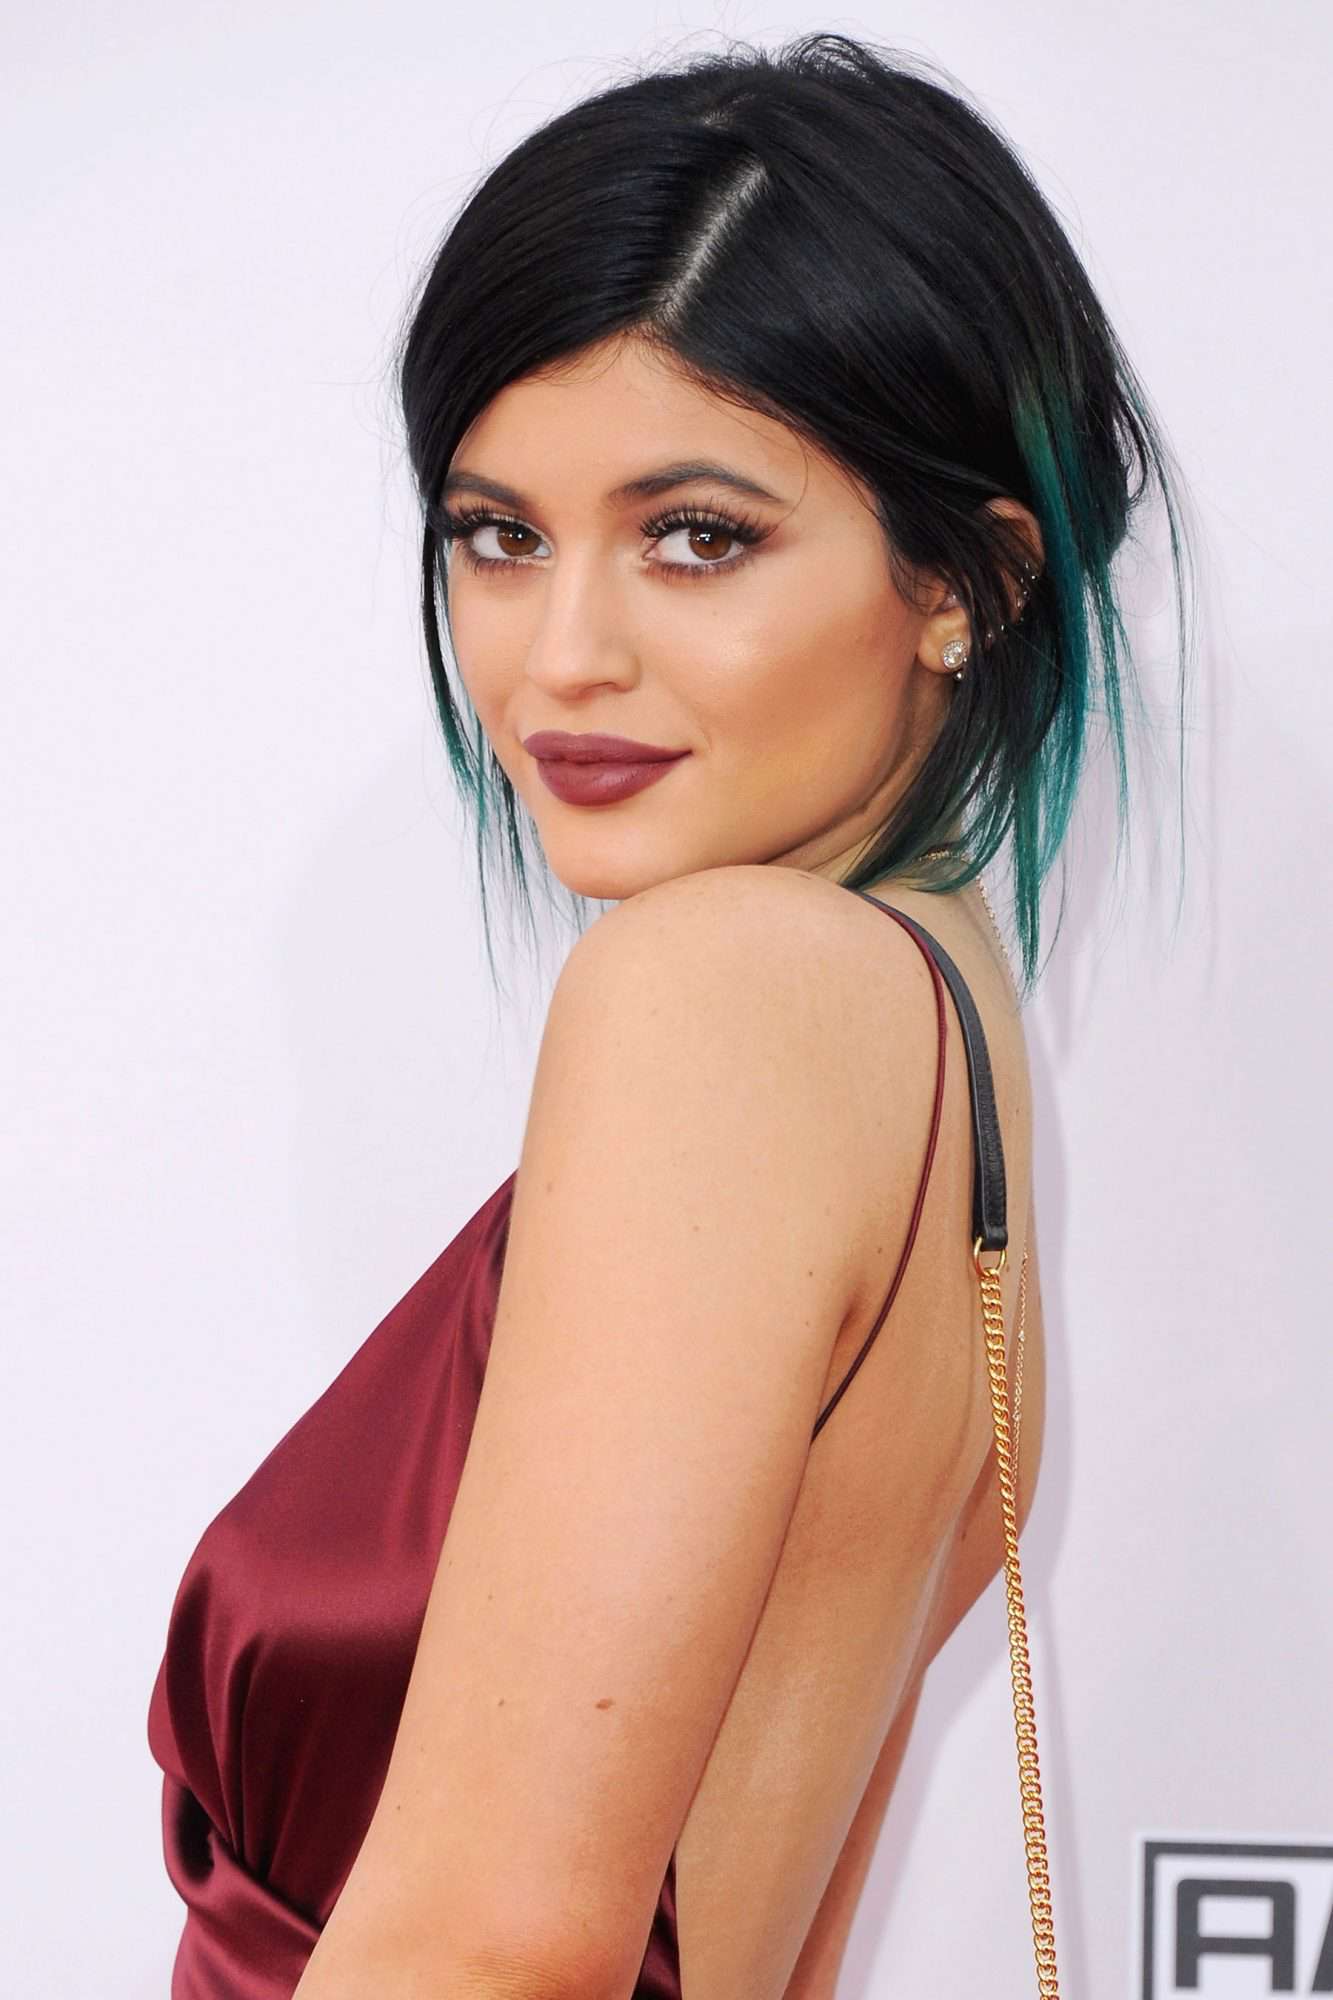 Kylie Jenner at the 42nd annual American Music Awards on Nov. 23, 2014